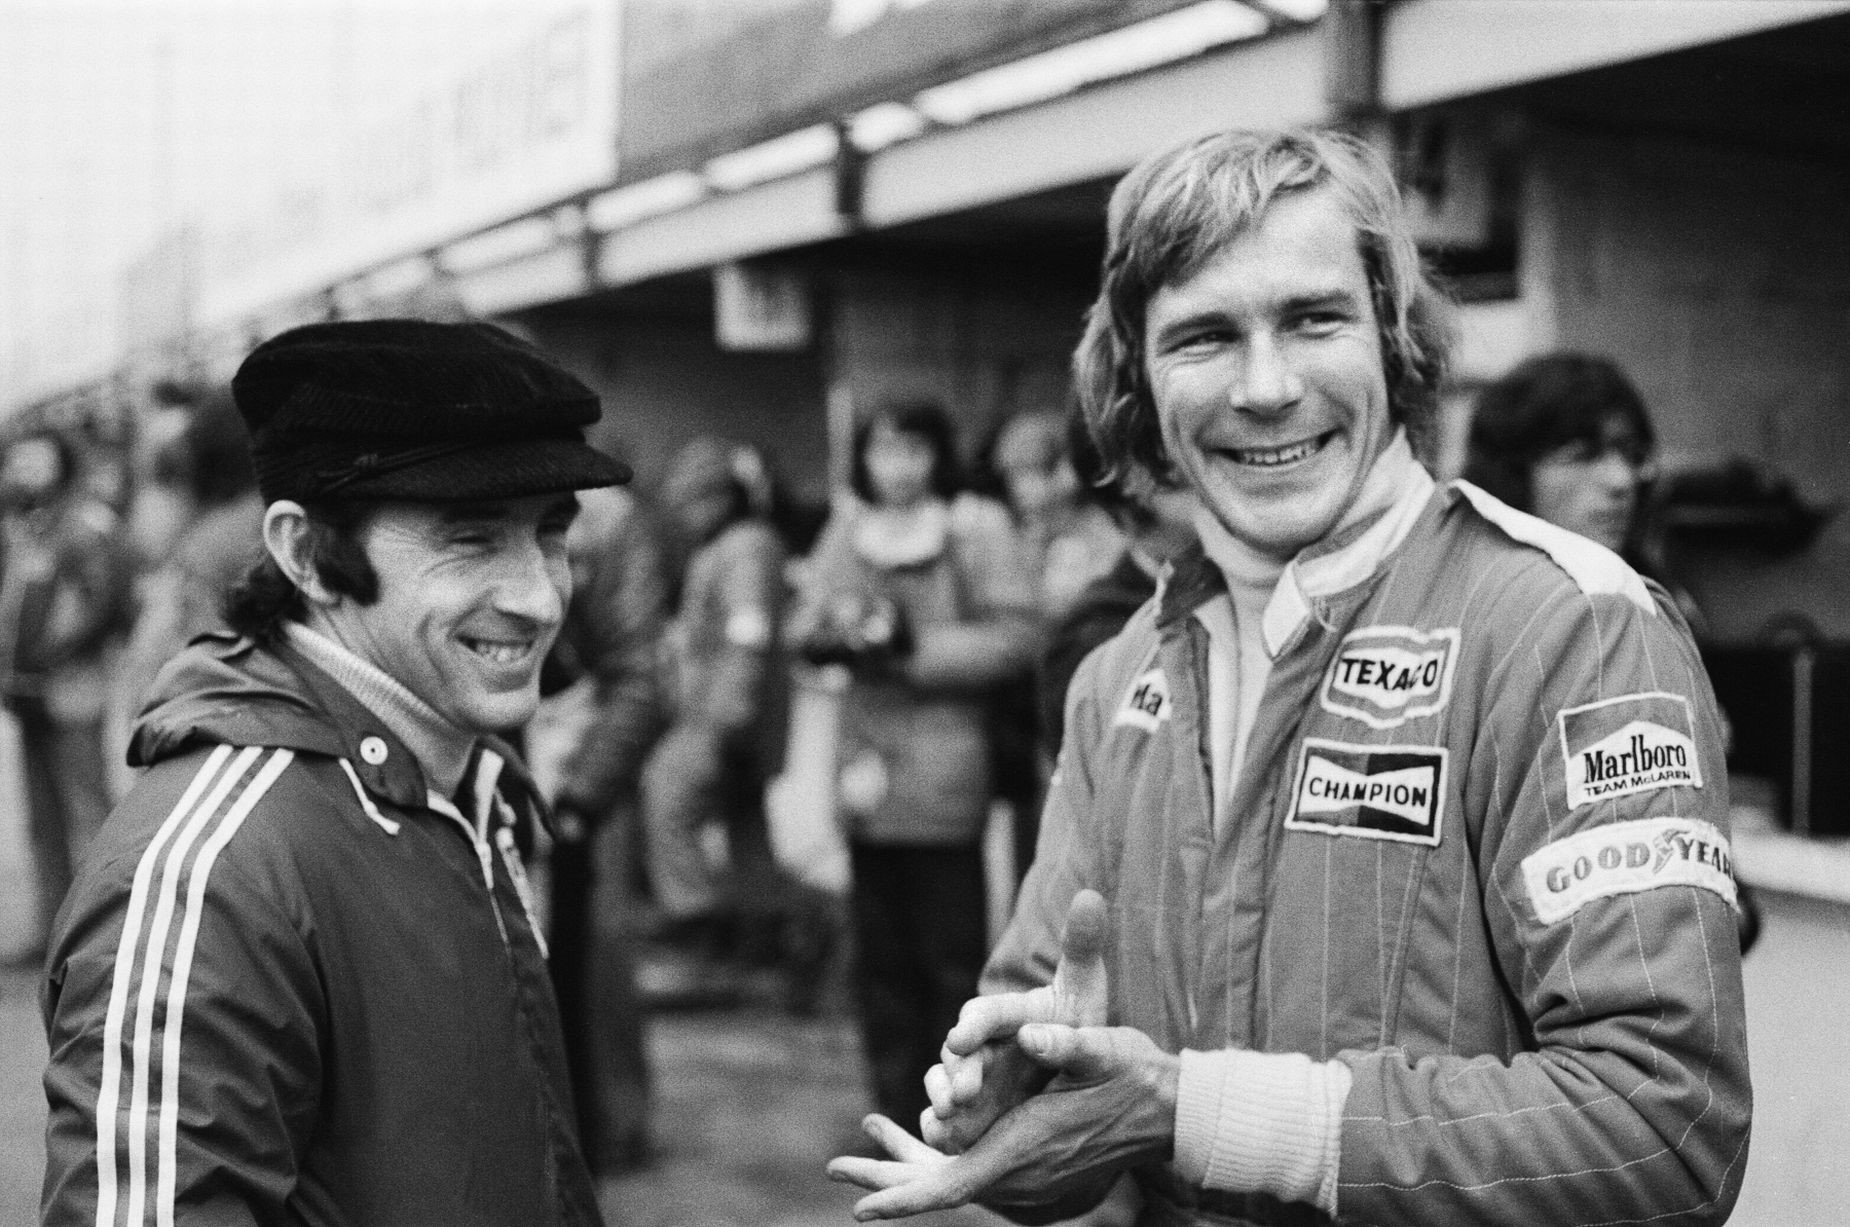 James Hunt and Jackie Stewart together at Brands Hatch on 14th March 1976. James is driving today in practice for the big race tomorrow Sunday.